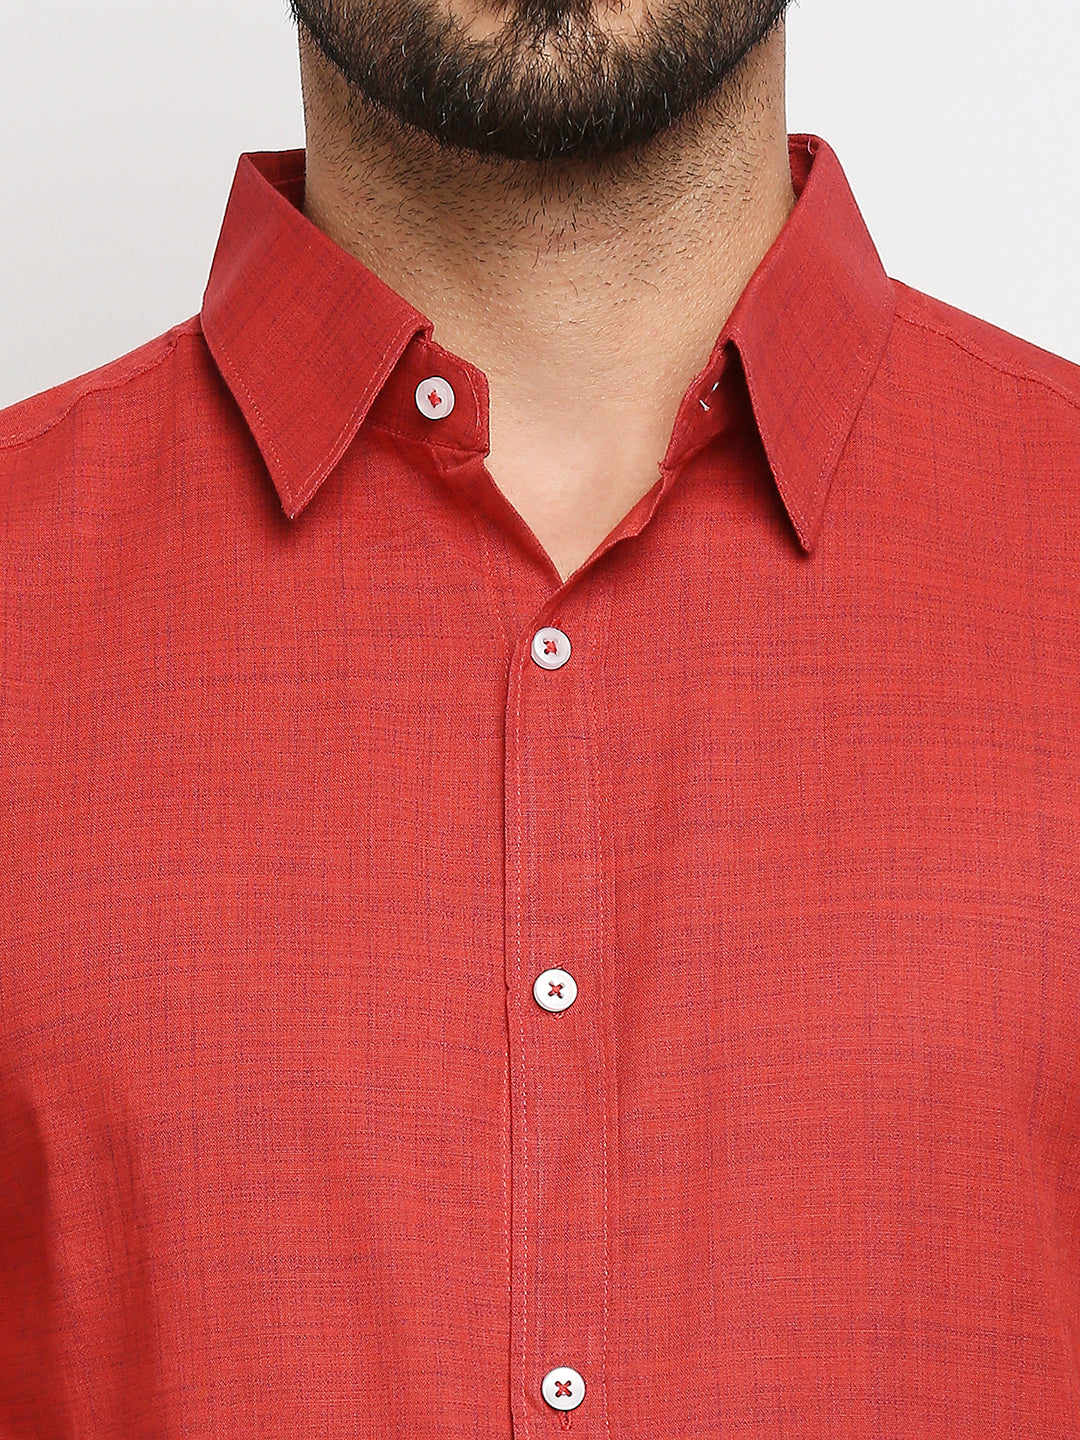 Bliss Pure Cotton Red Shirt